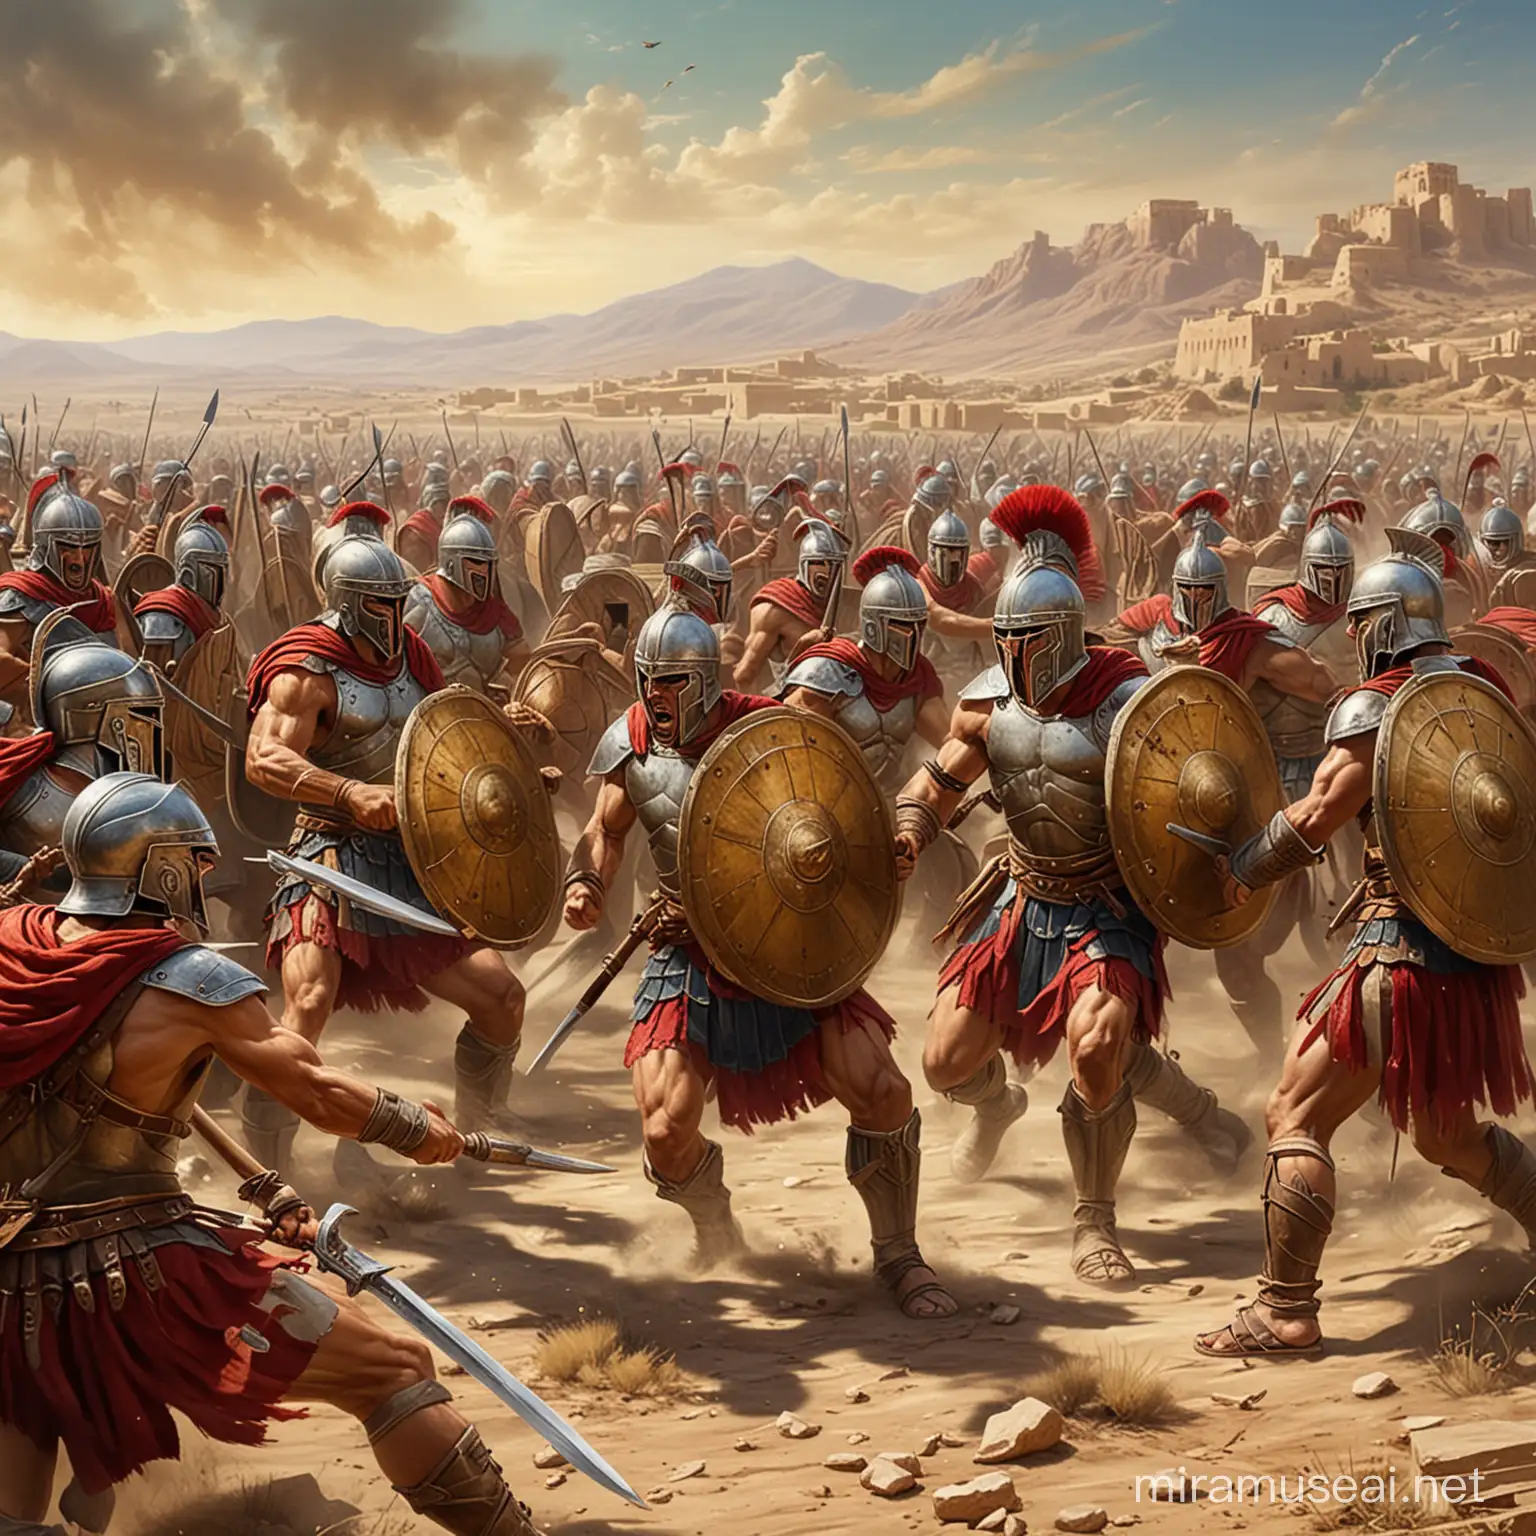 Spartans fighting against persians valiantly.
